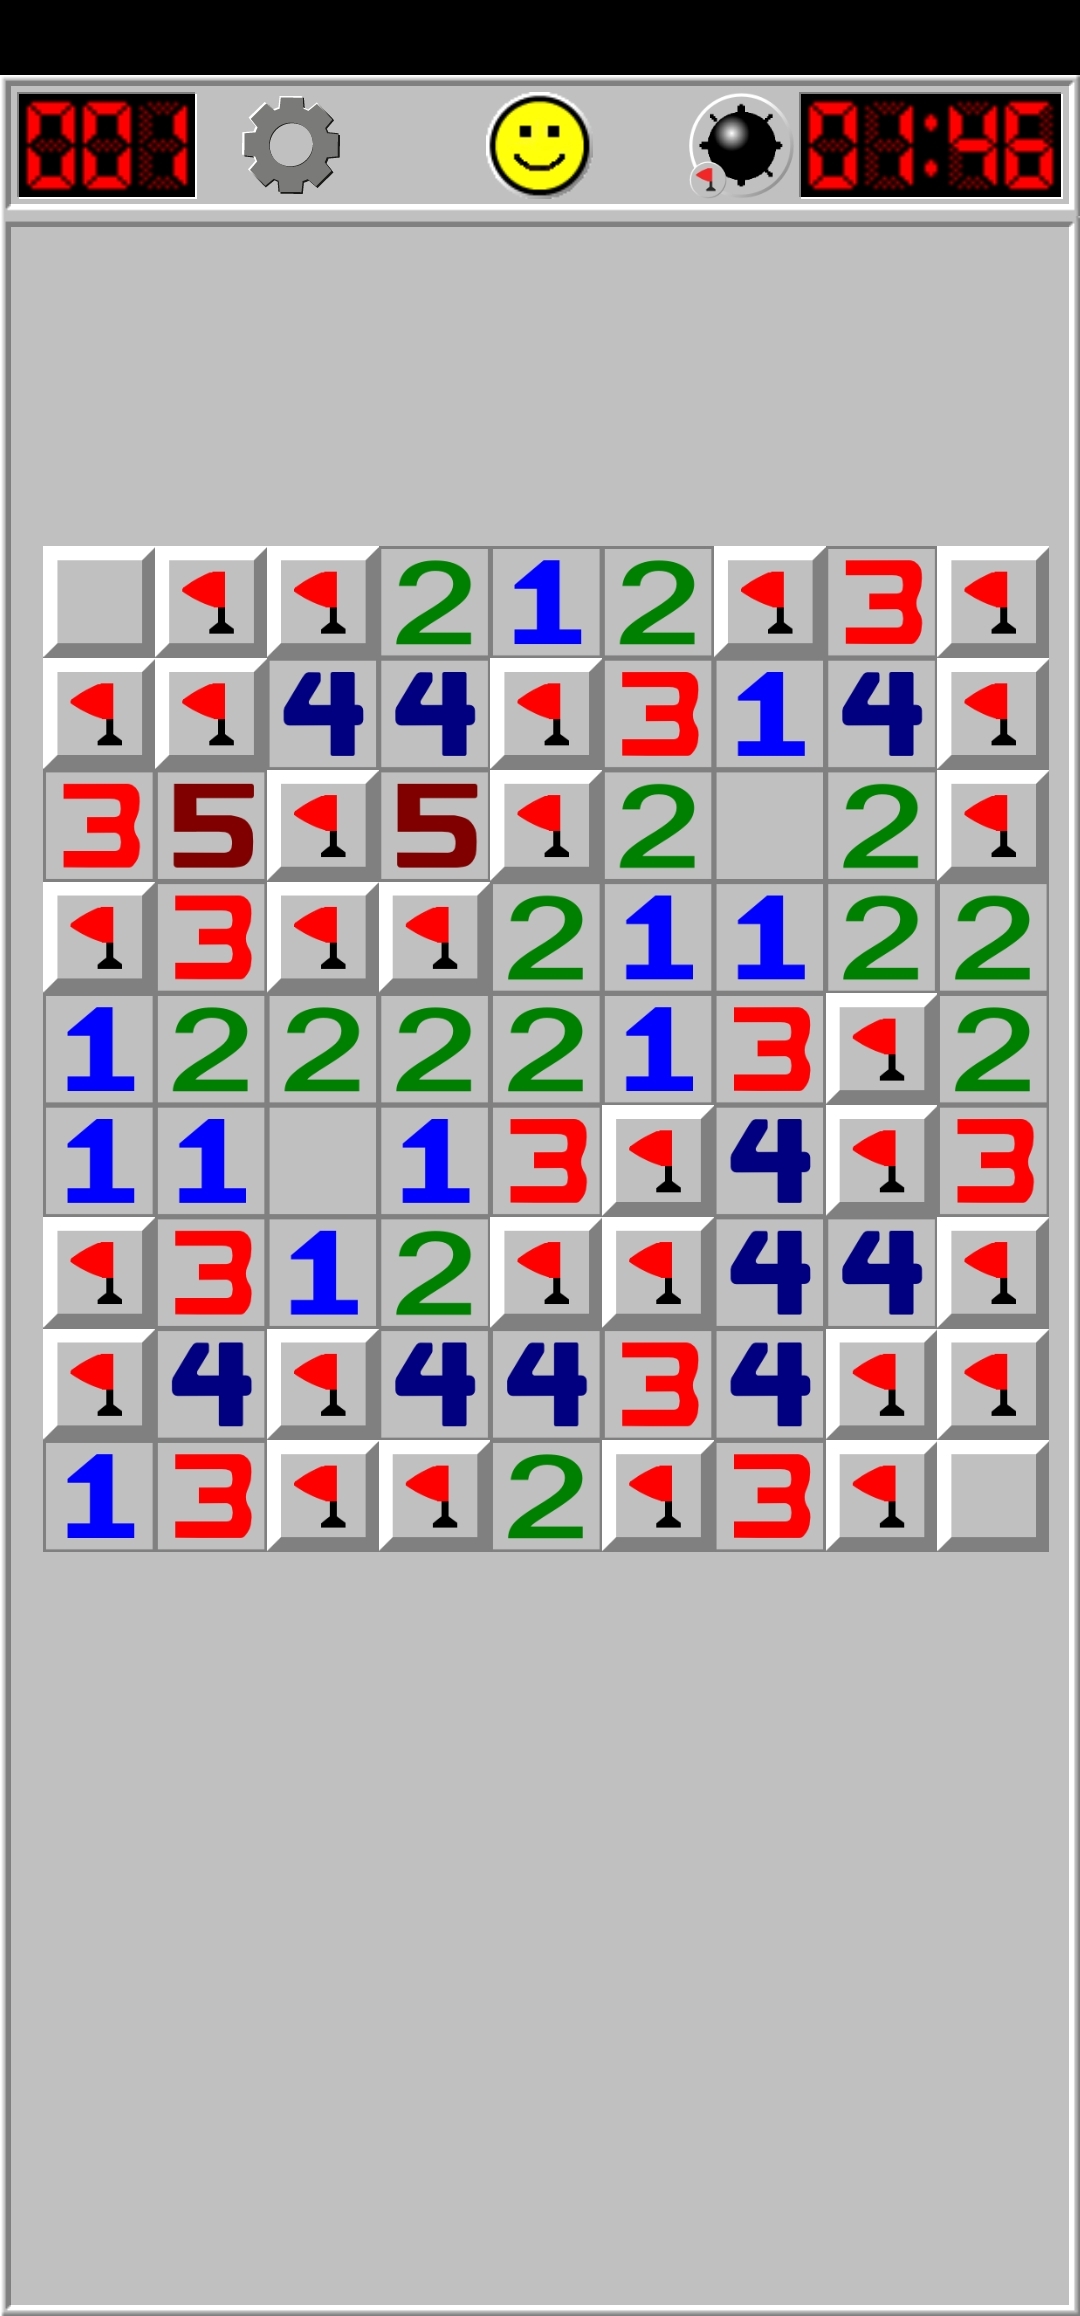 bad 50/50 in minesweeper